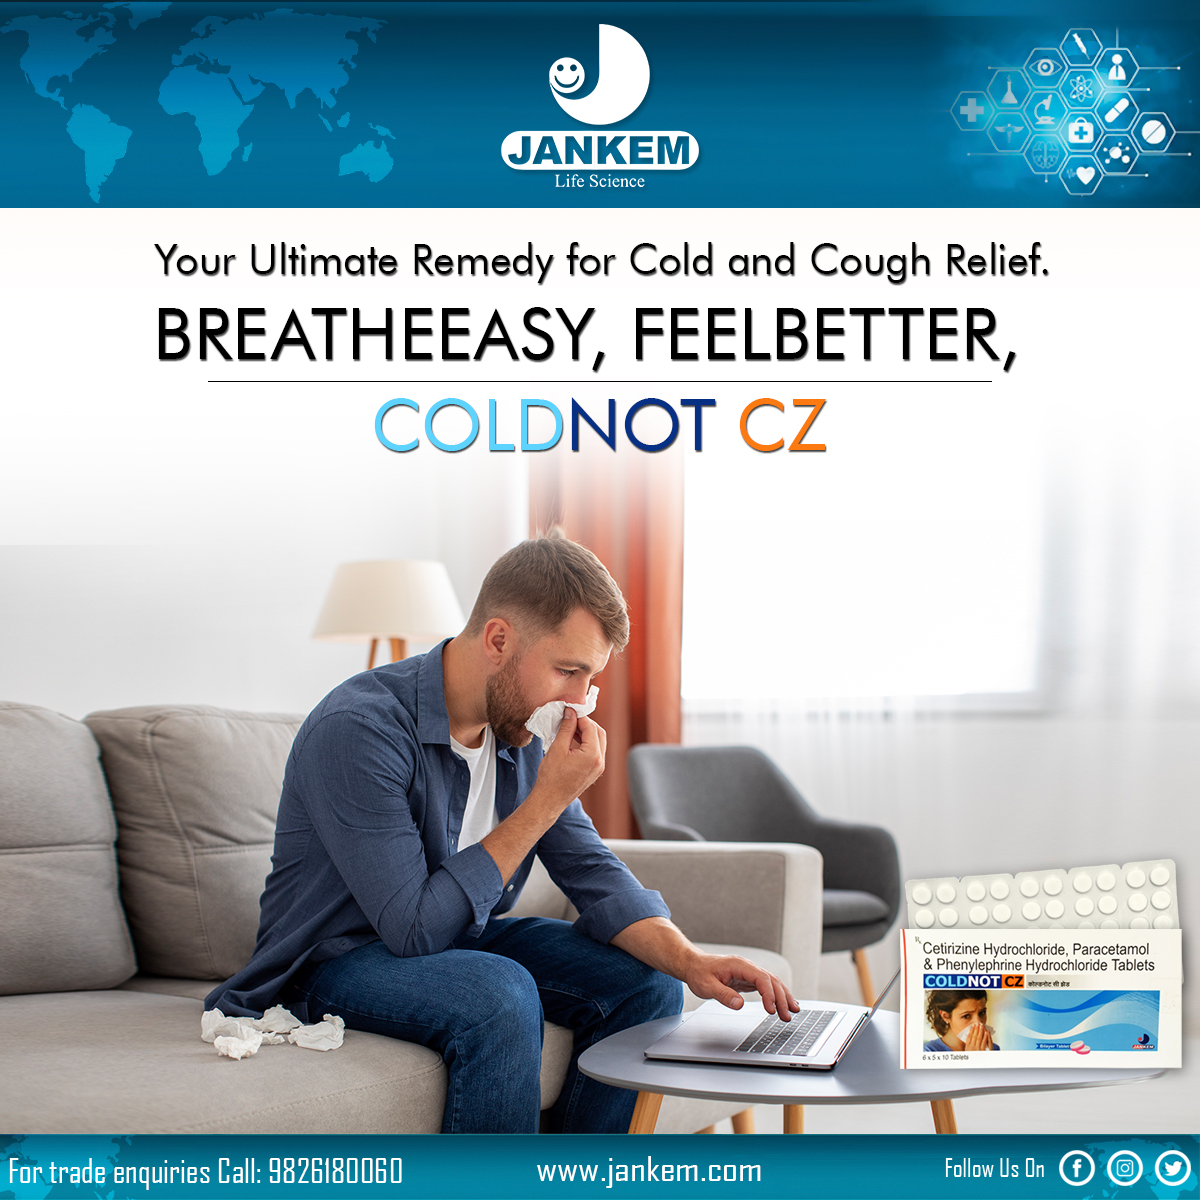 'Provide comfort and care to your loved one with ColdNot-CZ.'

#ColdAndFluCare #ComfortAndCare #WellnessSupport #HealthAndHealing #StayHealthy #FluRelief #BoostImmunity #NaturalRemedies #FamilyWellness #TakeCareOfYourLovedOnes